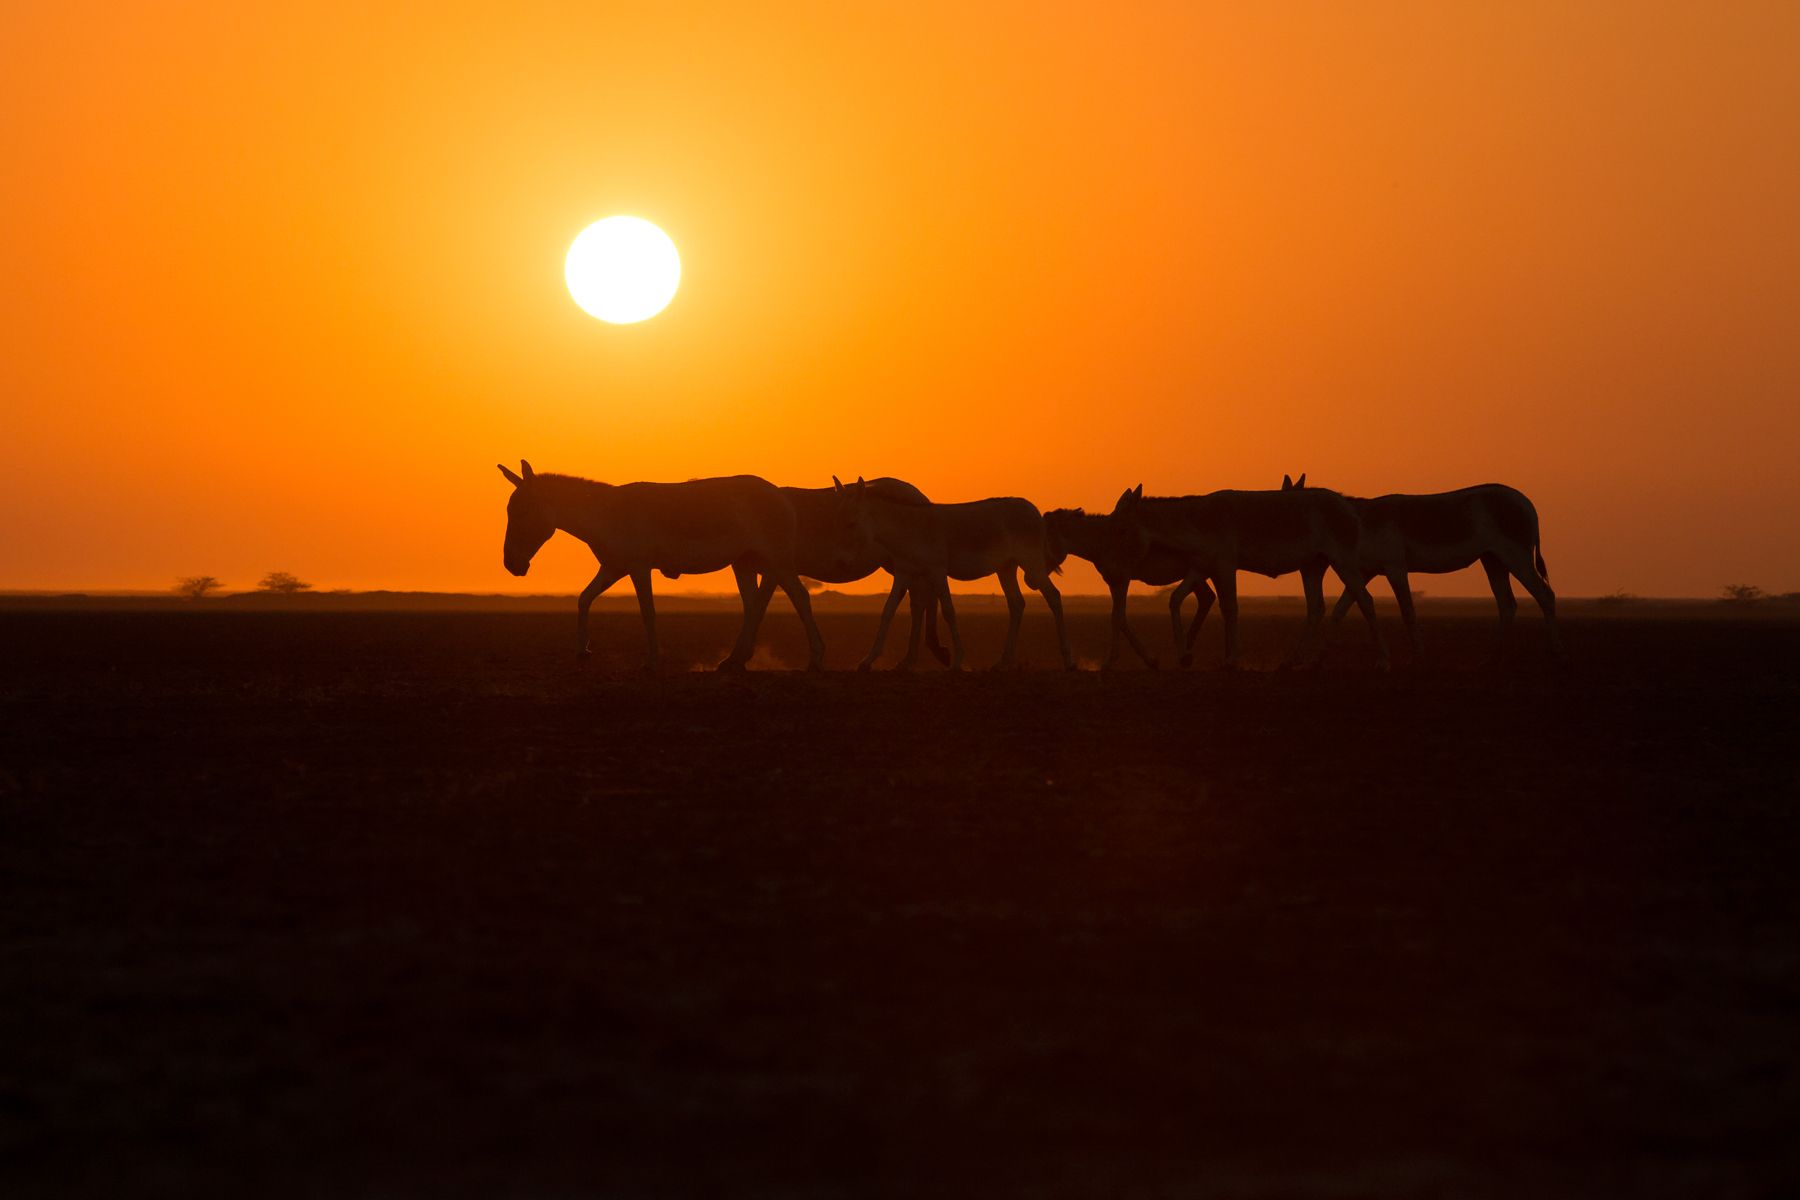 A line of Indian Wild Asses at sunset in the Little Rann of Kutch, Gujarat